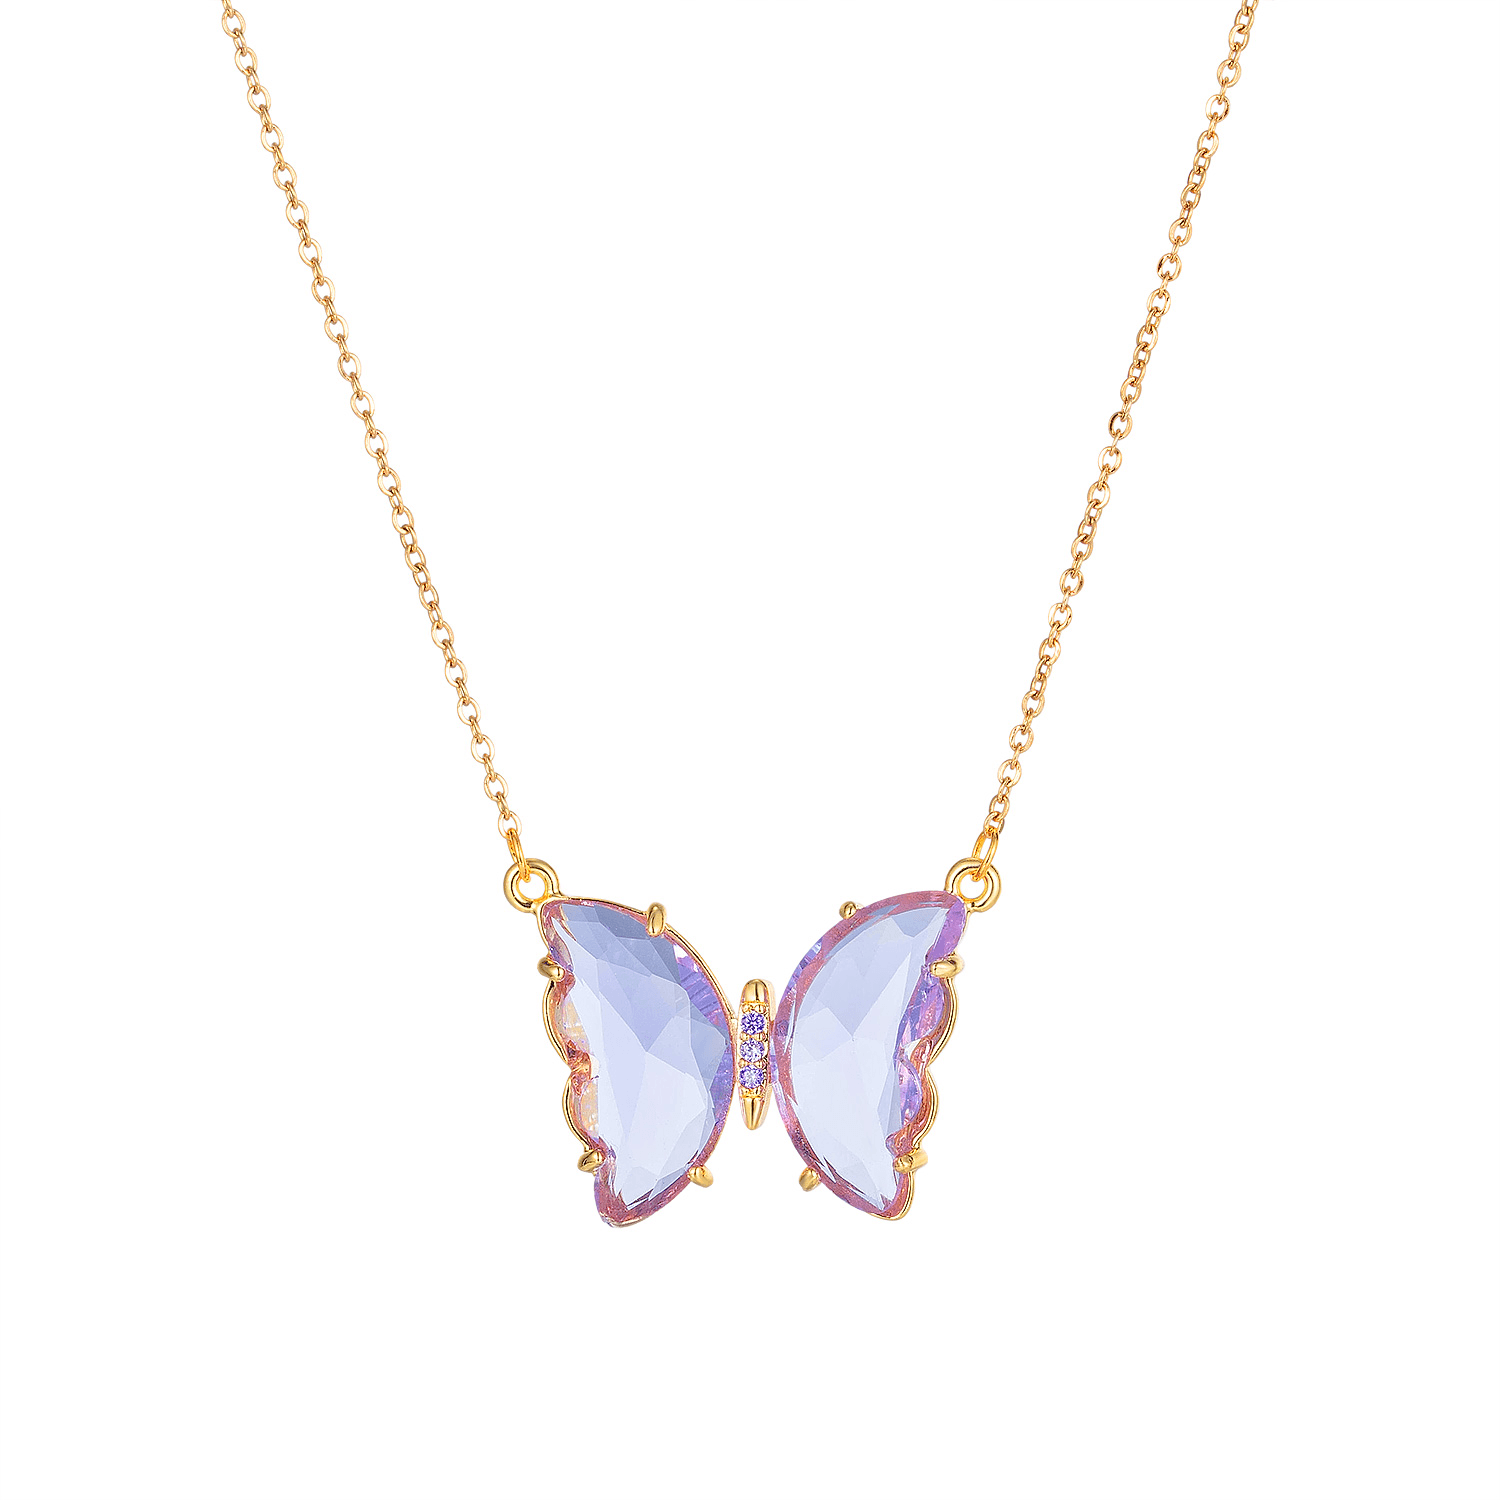 Crystal Butterfly Necklace Purple - Pura Jewels